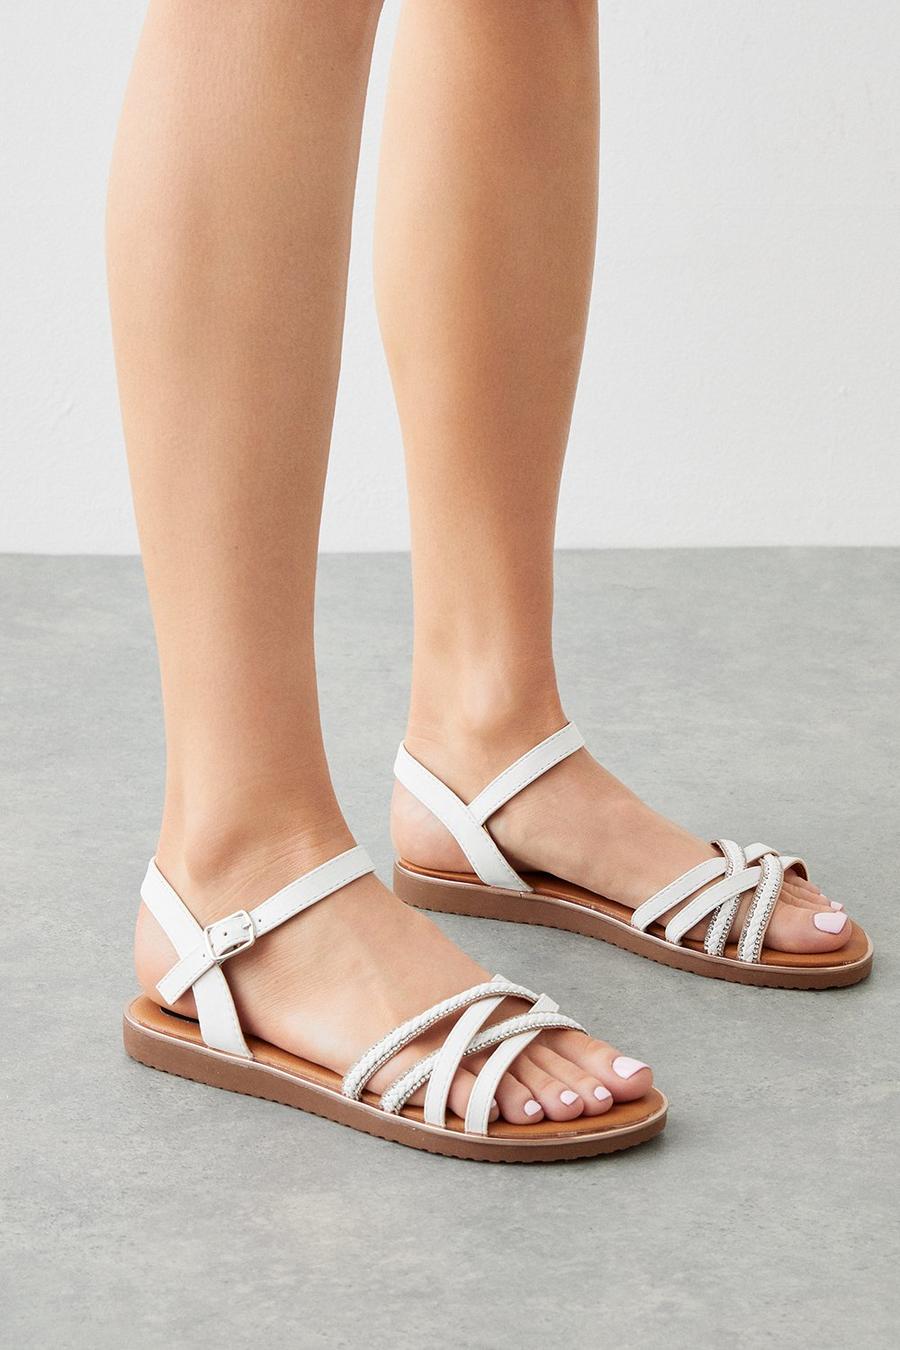 Good For The Sole: Martha Flexi Sole Flat Sandals